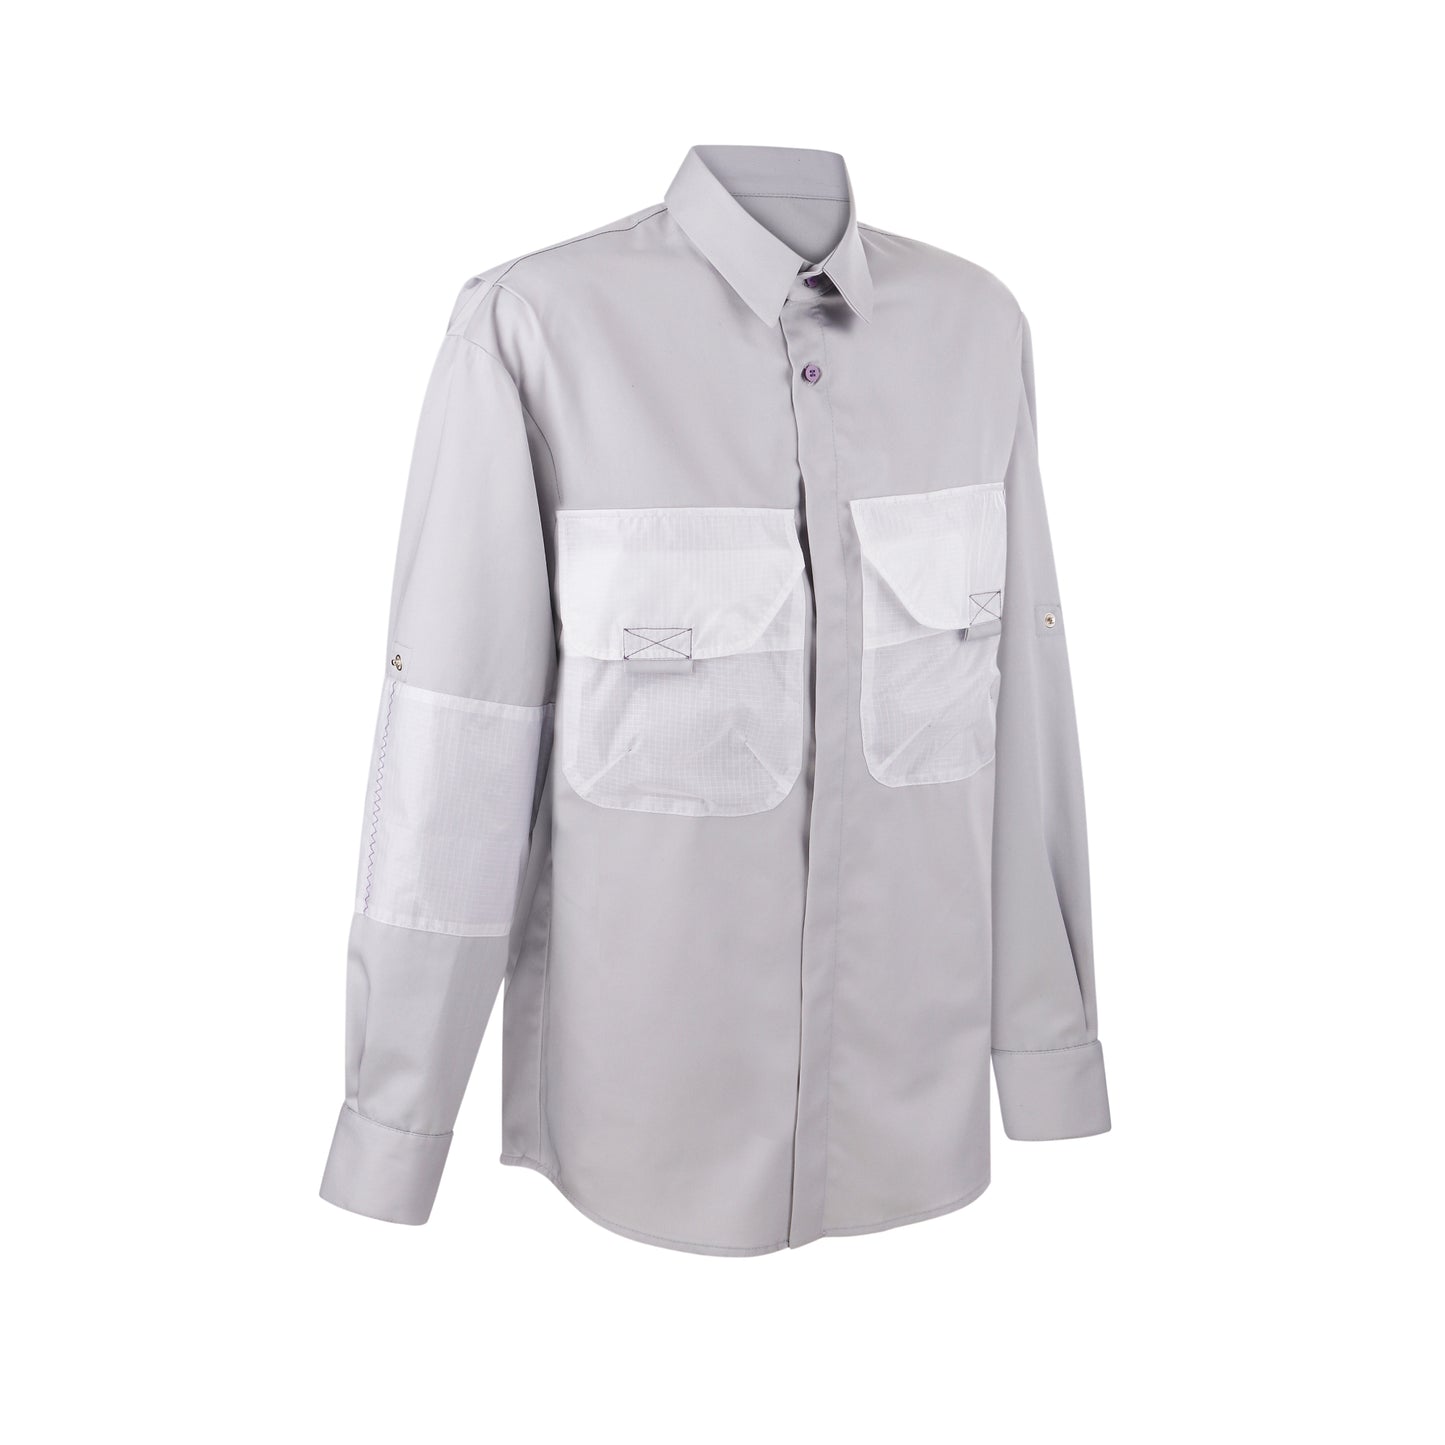 Collared casual button up shirt from REwind